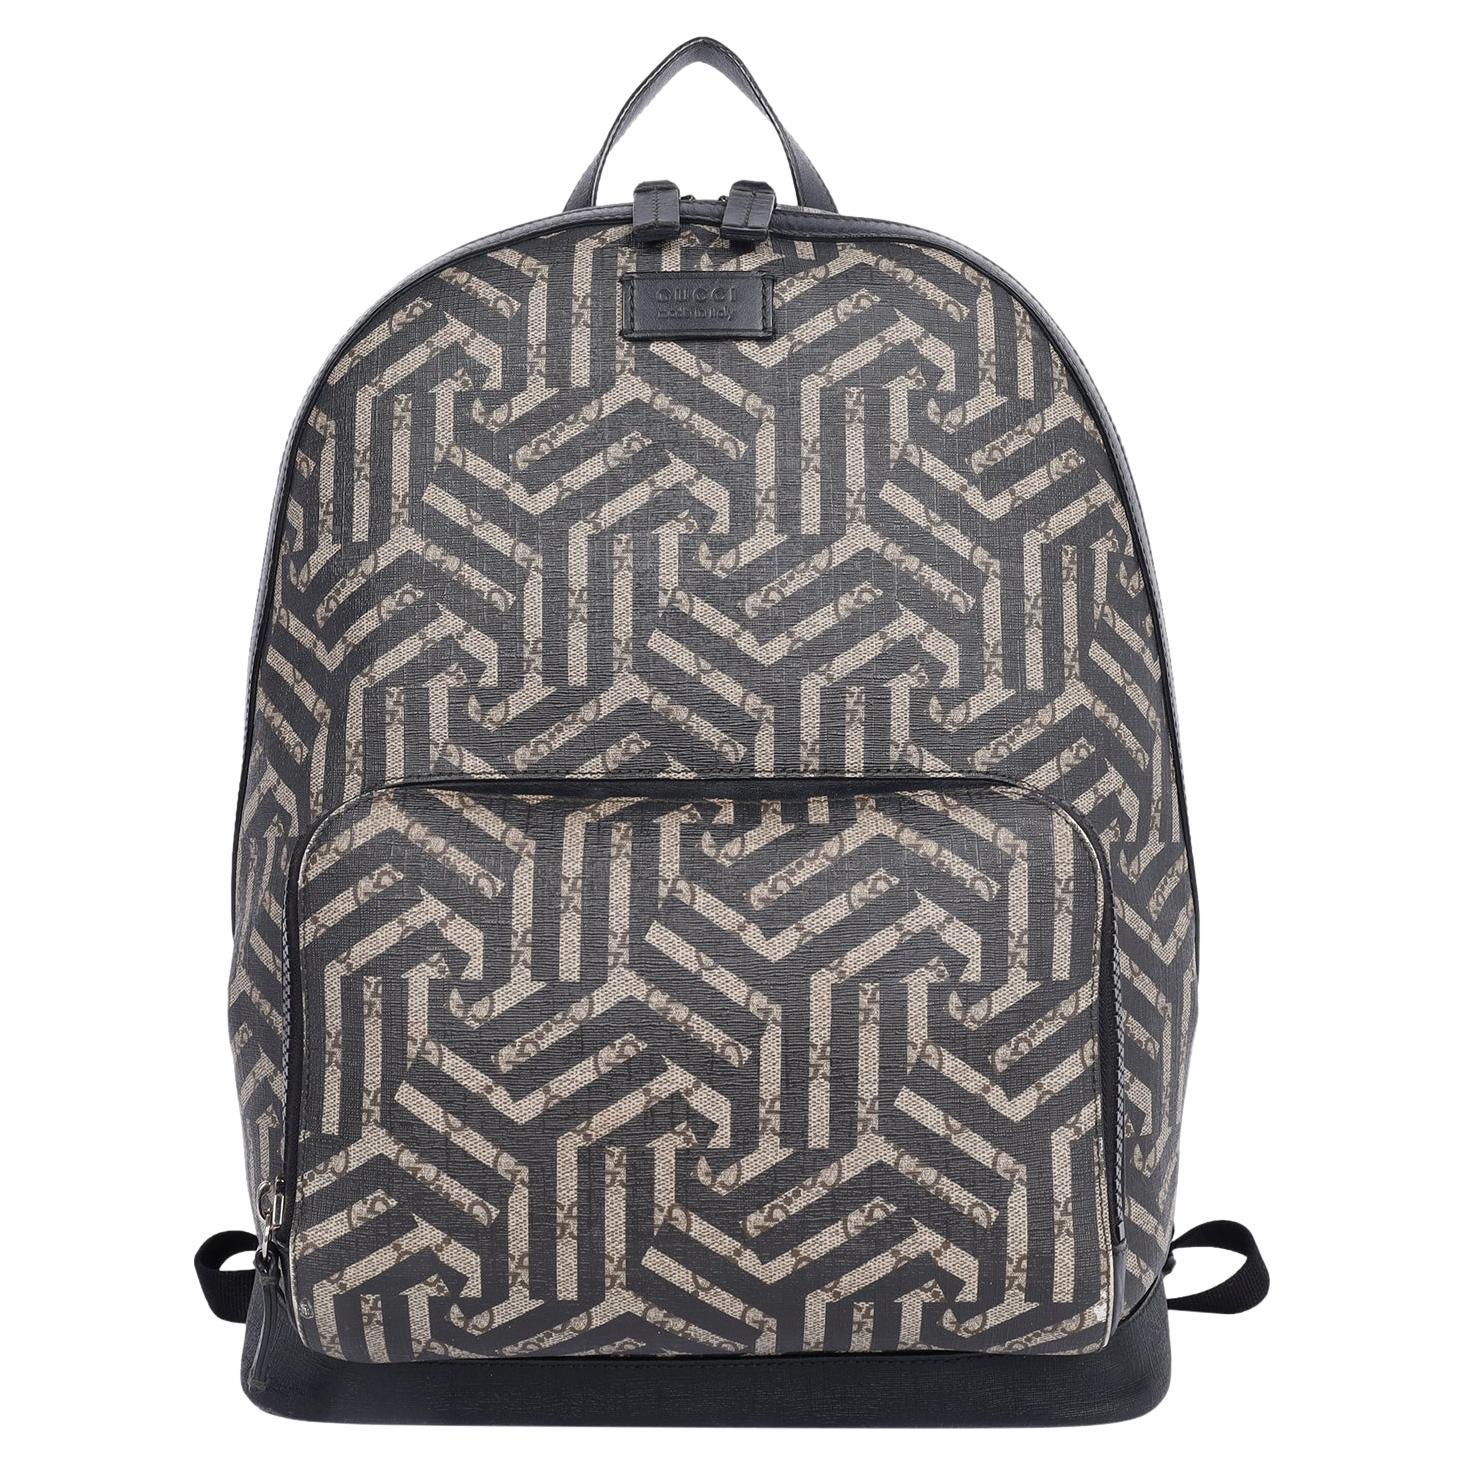 Gucci GG Supreme Monogram Caleido Backpack in Black For Sale